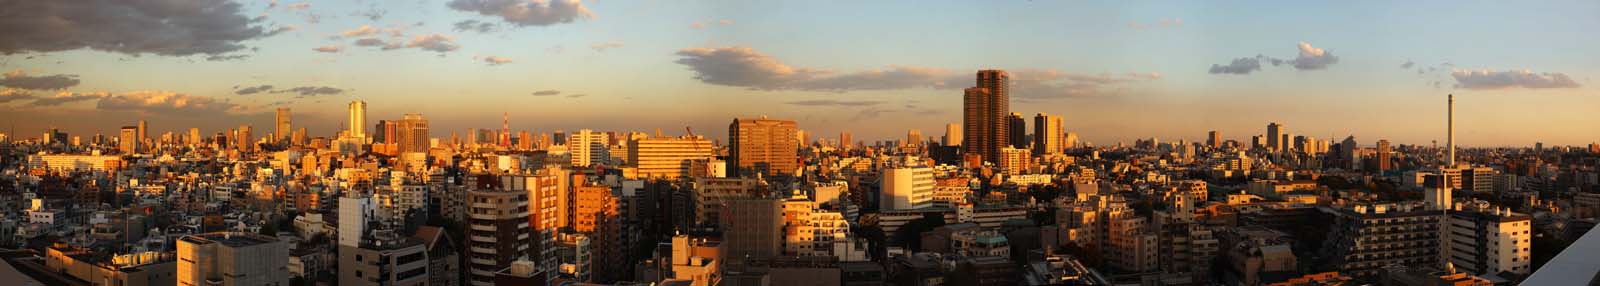 photo,material,free,landscape,picture,stock photo,Creative Commons,Tokyo of the dusk, Roppongi Hills, building, Tokyo Tower, 